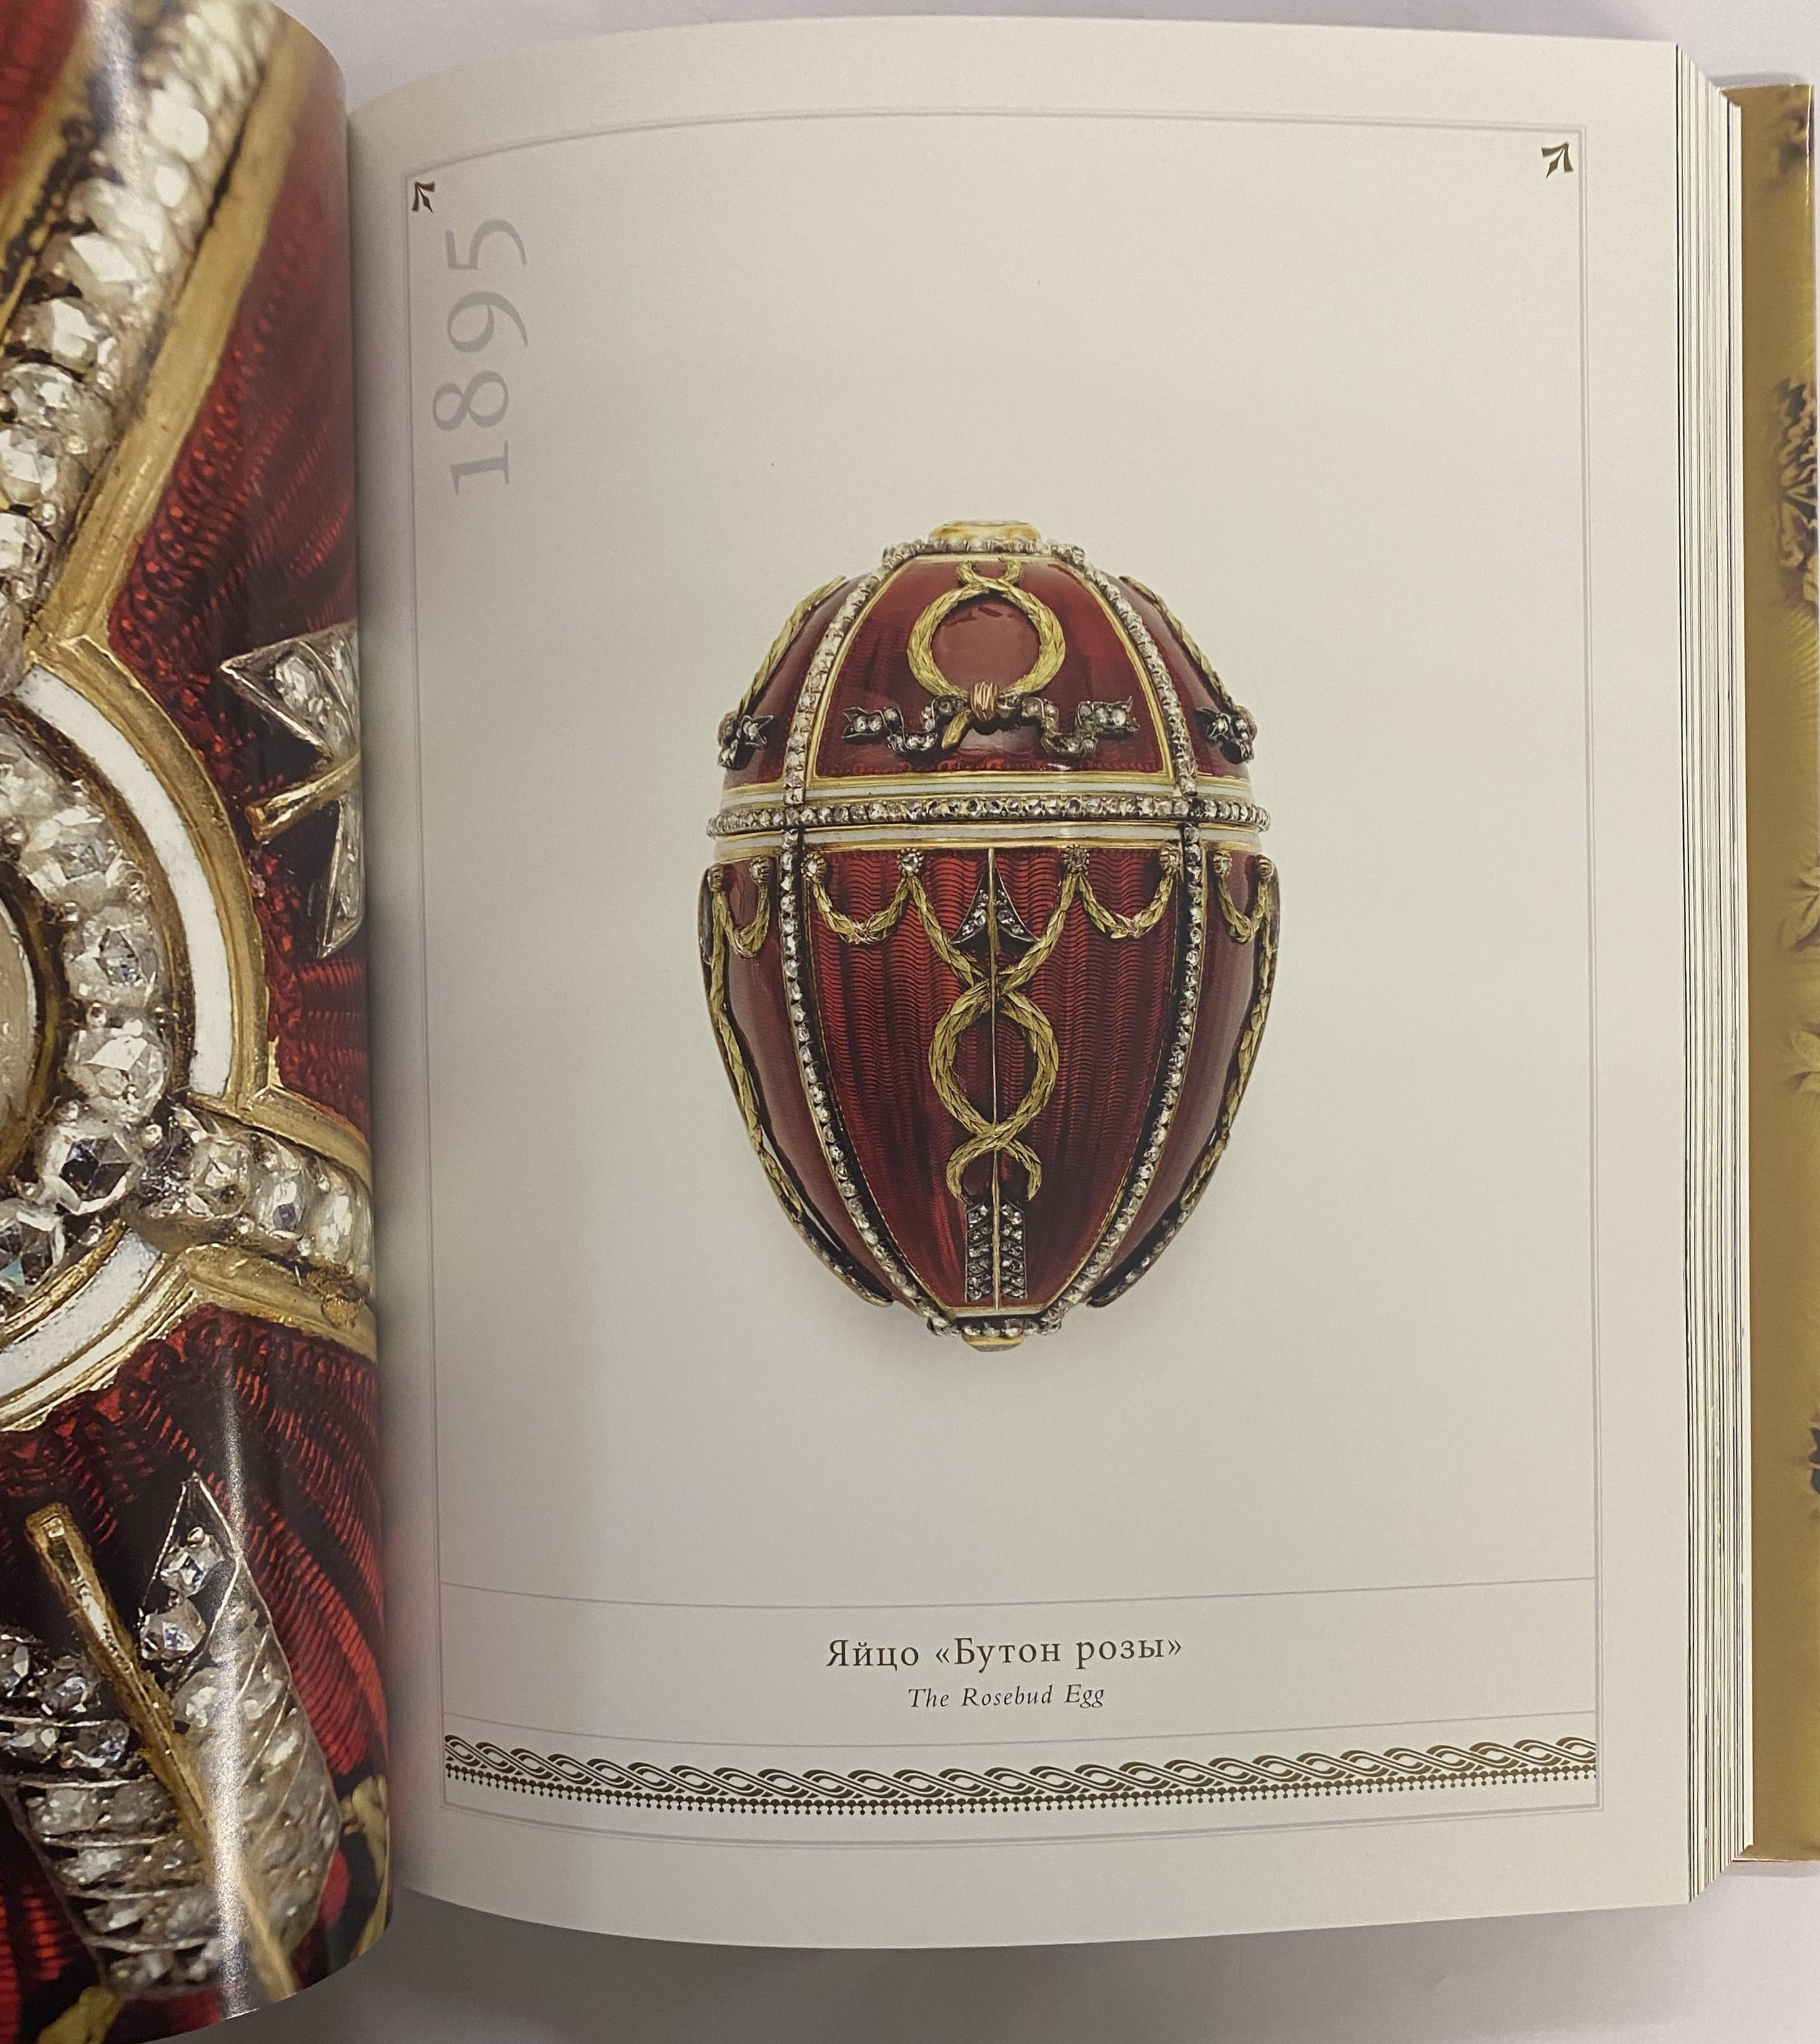 Faberge: Treasures of Imperial Russia by Geza von Habsburg (Book) For Sale 2